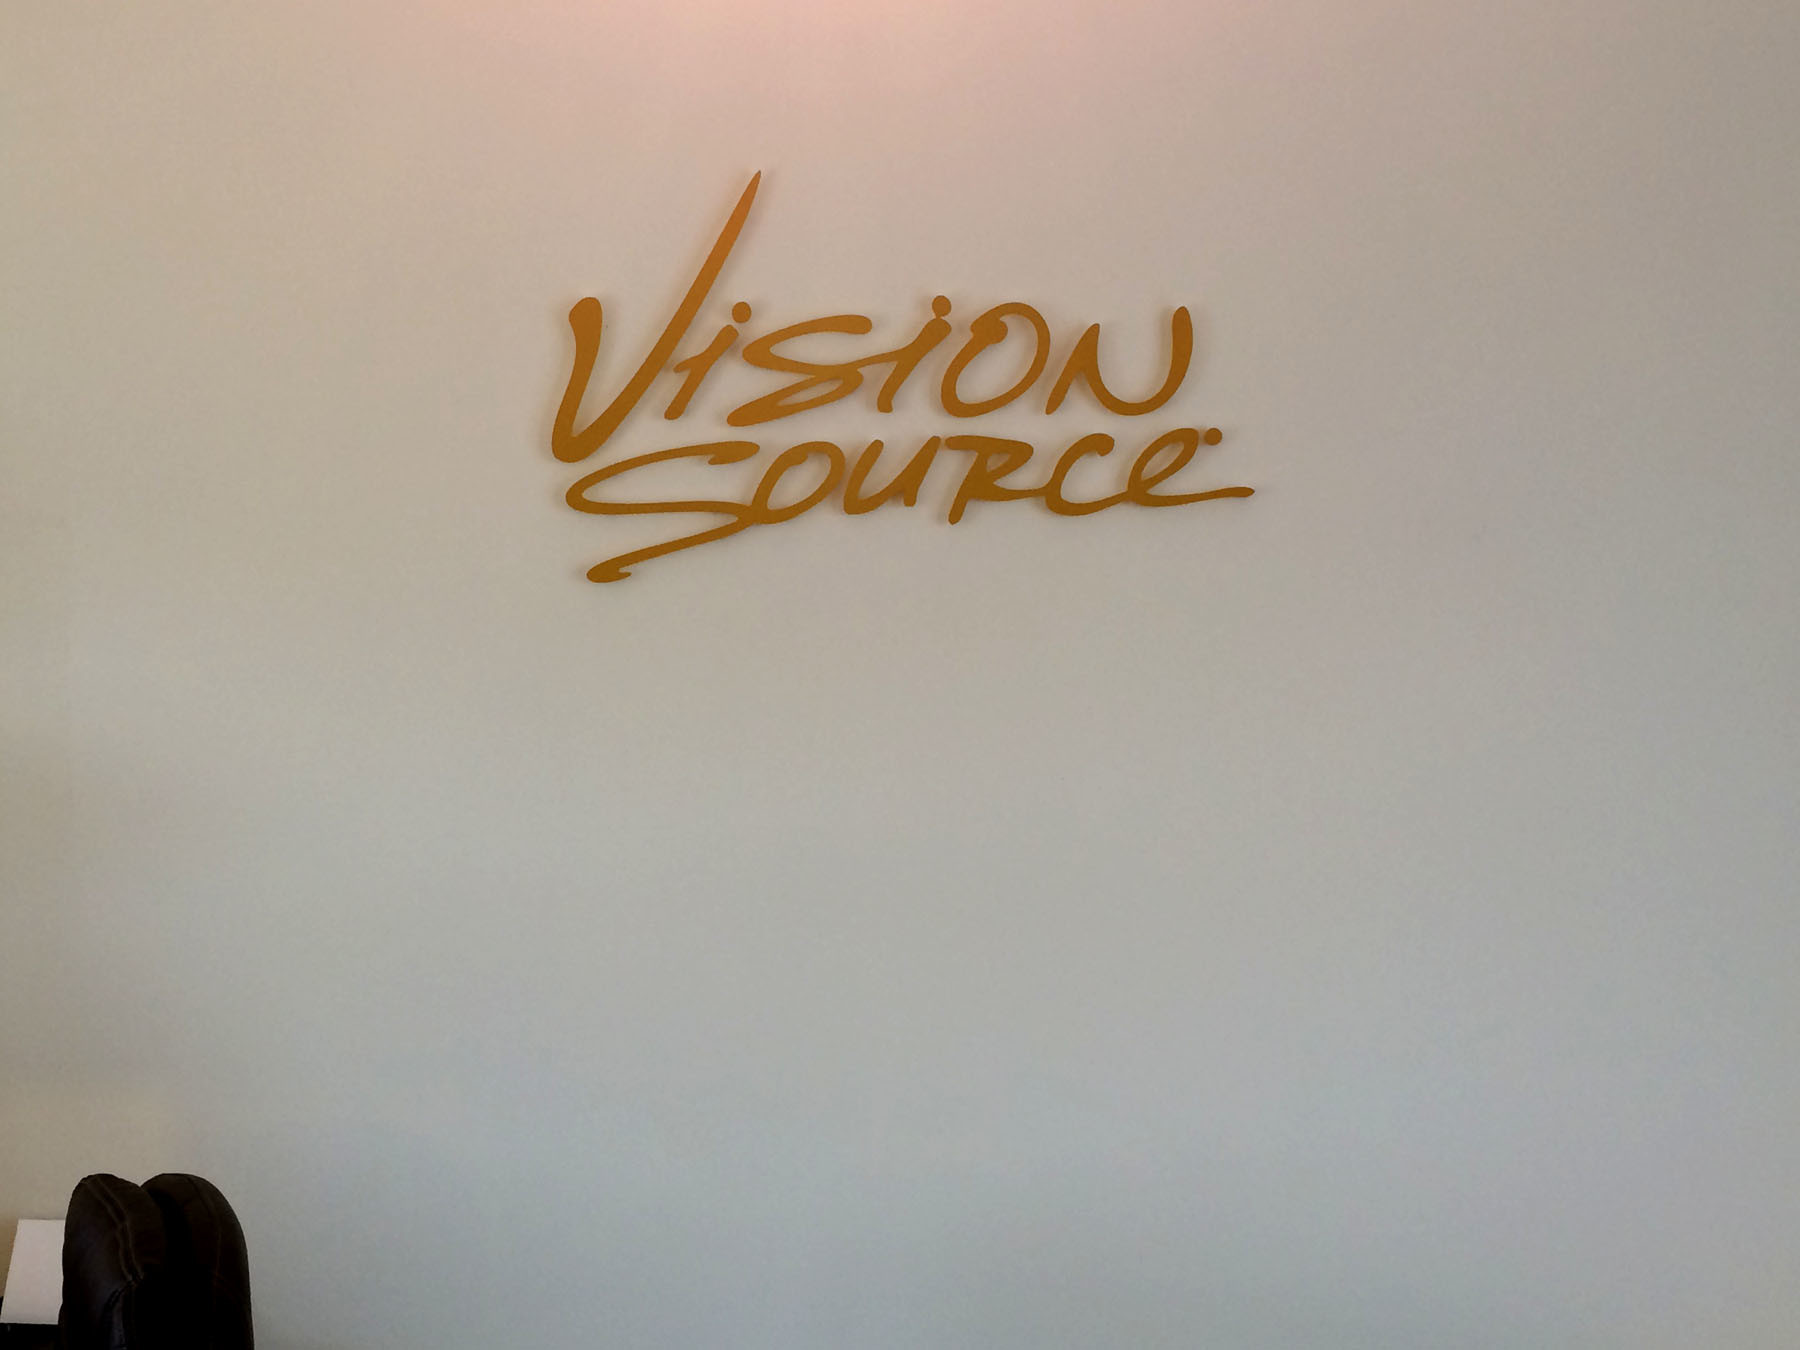 Vision Source Gold Interior Letters